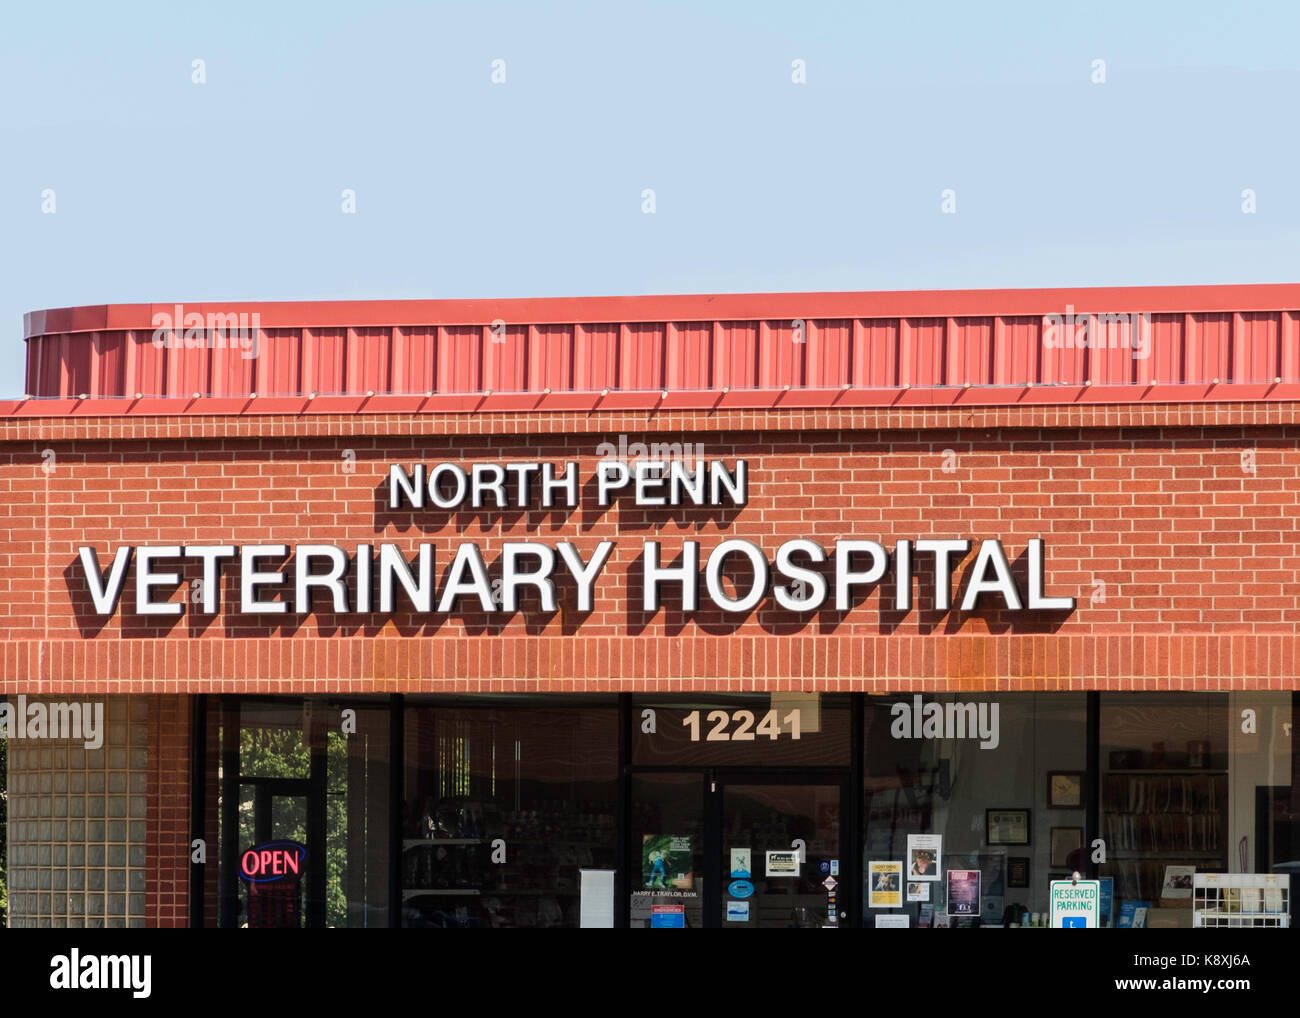 the storefront exterior sign of north penn veterinary hospital in K8XJ6A